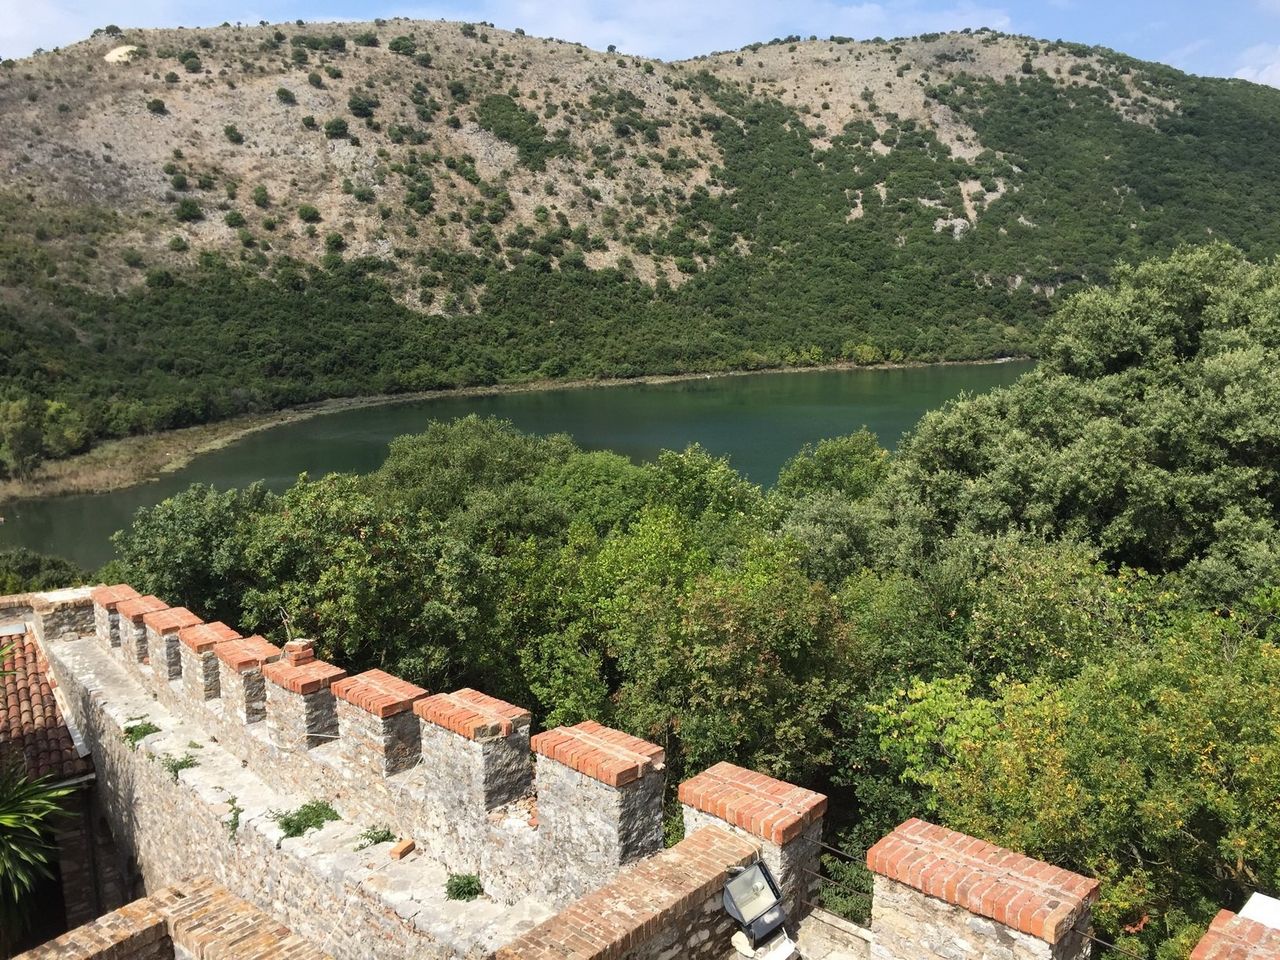 Visit the ancient ruins of Butrint